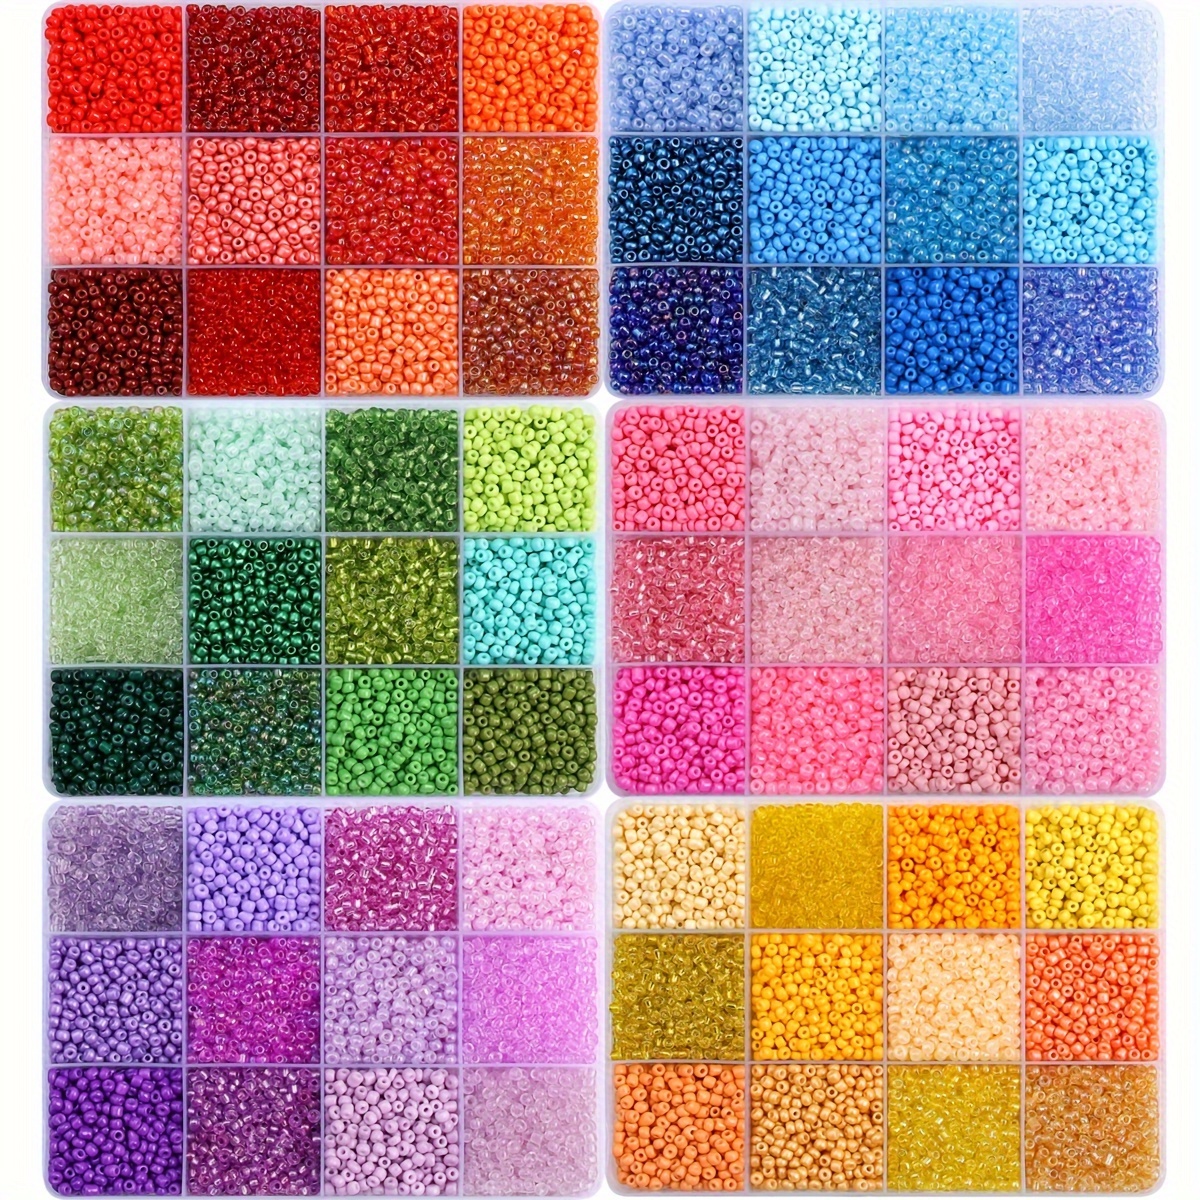 

6000pcs 3mm Glass Seed Beads, Assorted Colors, 12-grid Storage Box, Diy Jewelry Making Kit, Loose Beads For Bracelets, Necklaces Crafts